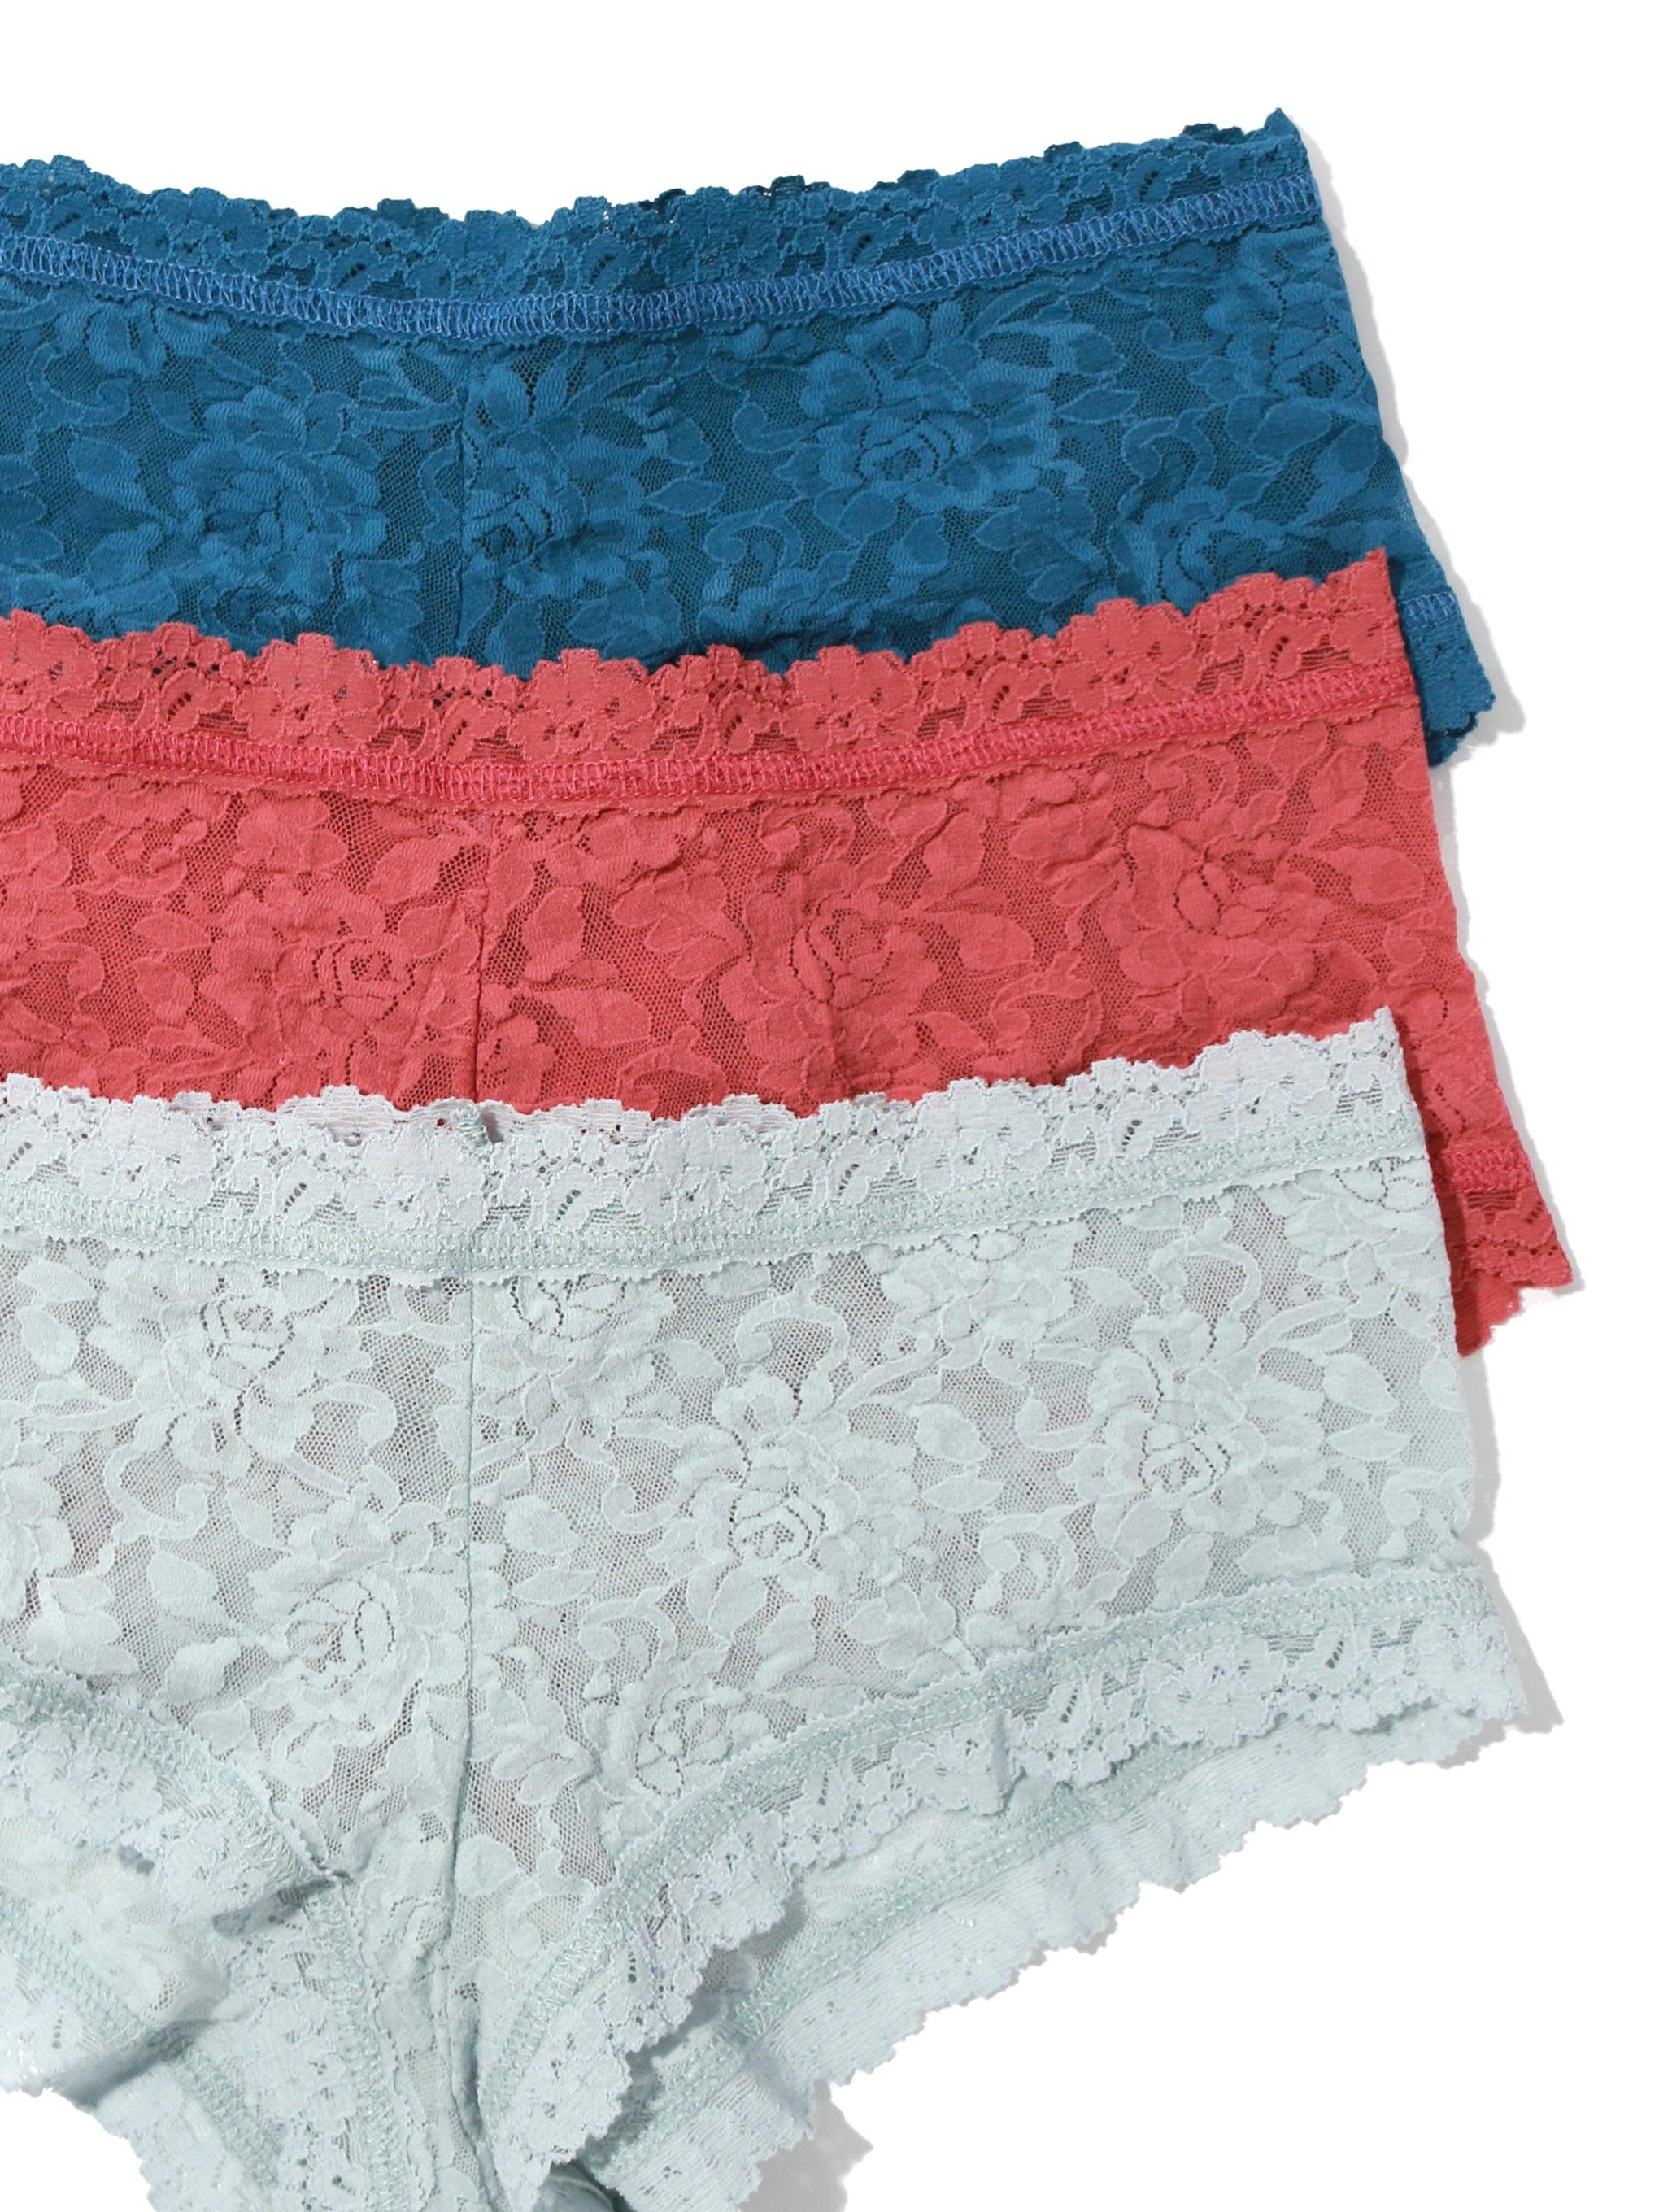 6 Pack of Women Hipster Panties Floral Lace Boyshorts Cheeky